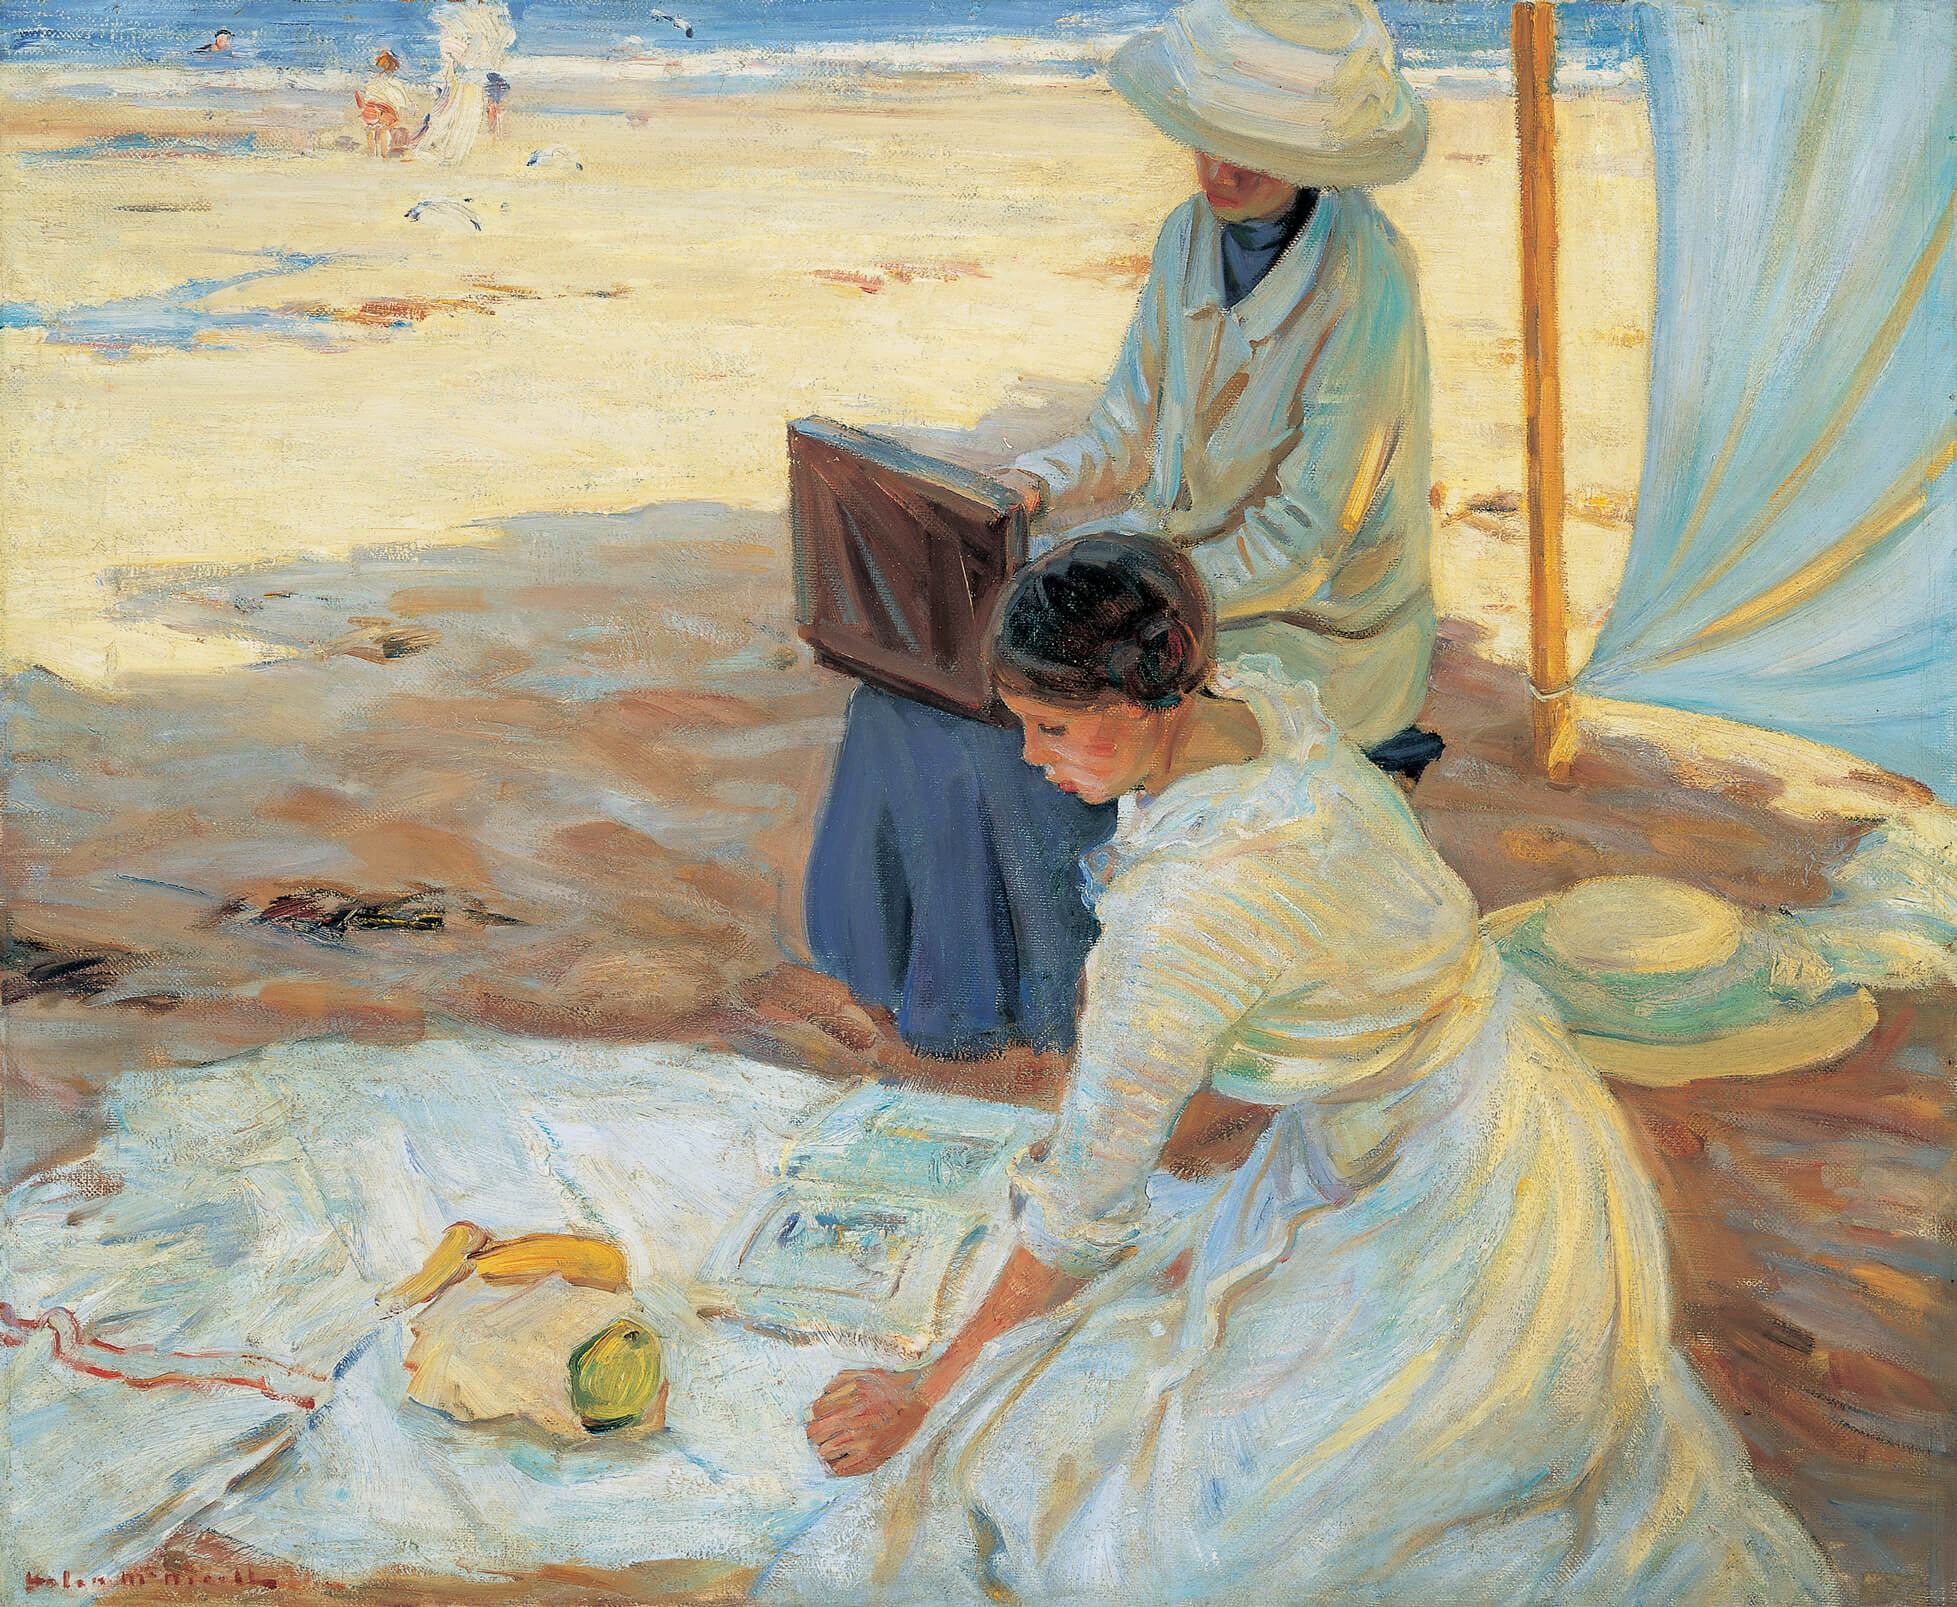 Helen McNicoll, Under the Shadow of the Tent, 1914